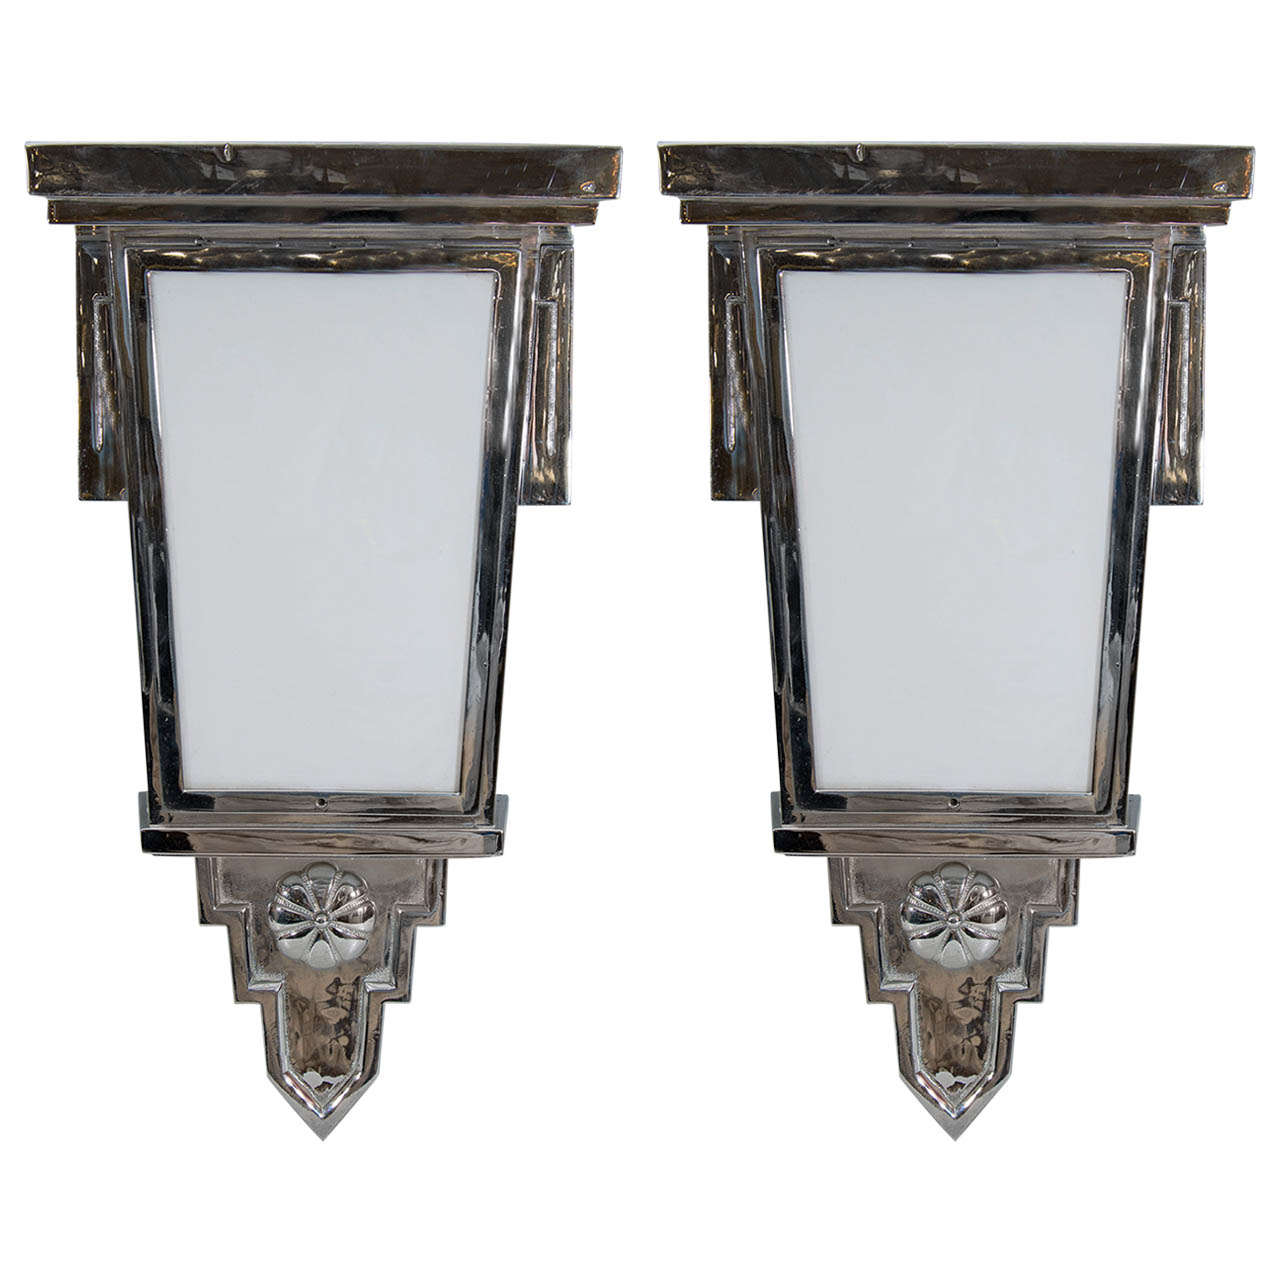  Exceptional Art Deco Pair of Nickled Bronze Wall Sconces For Sale